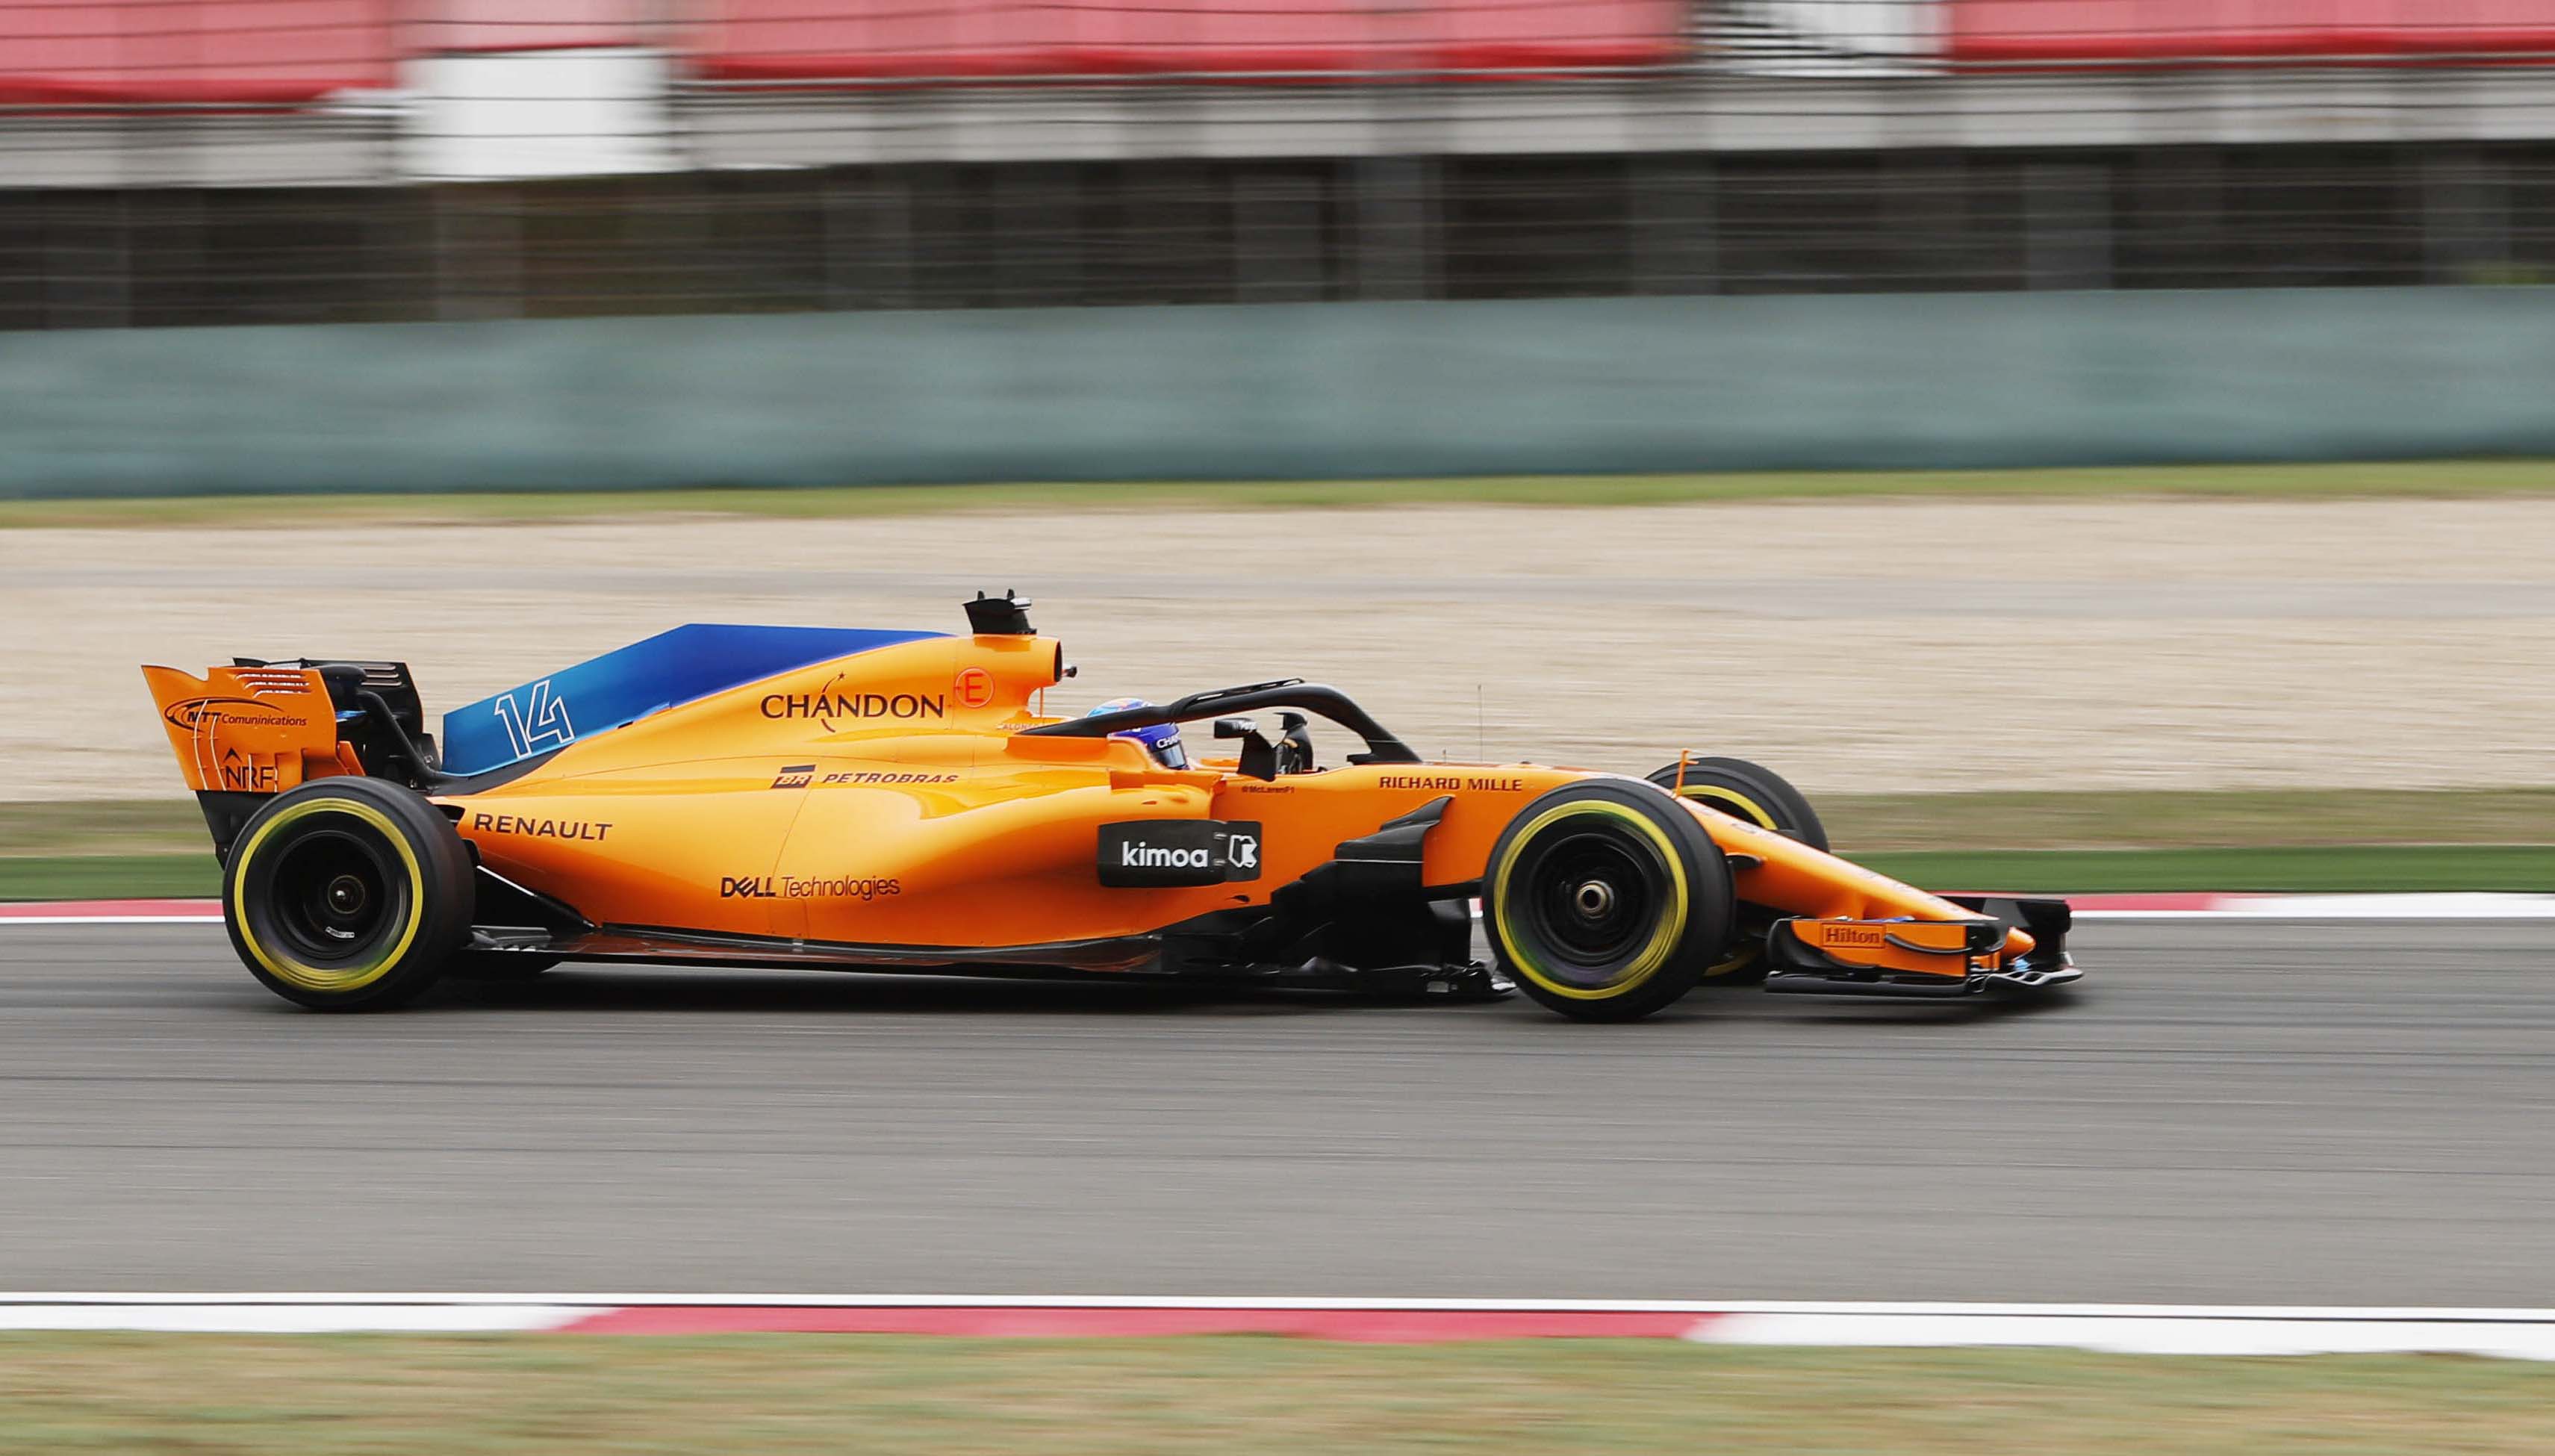 Photo of P13 and P14 for Alonso and Vandoorne, but McLaren hopeful of scoring points on Sunday